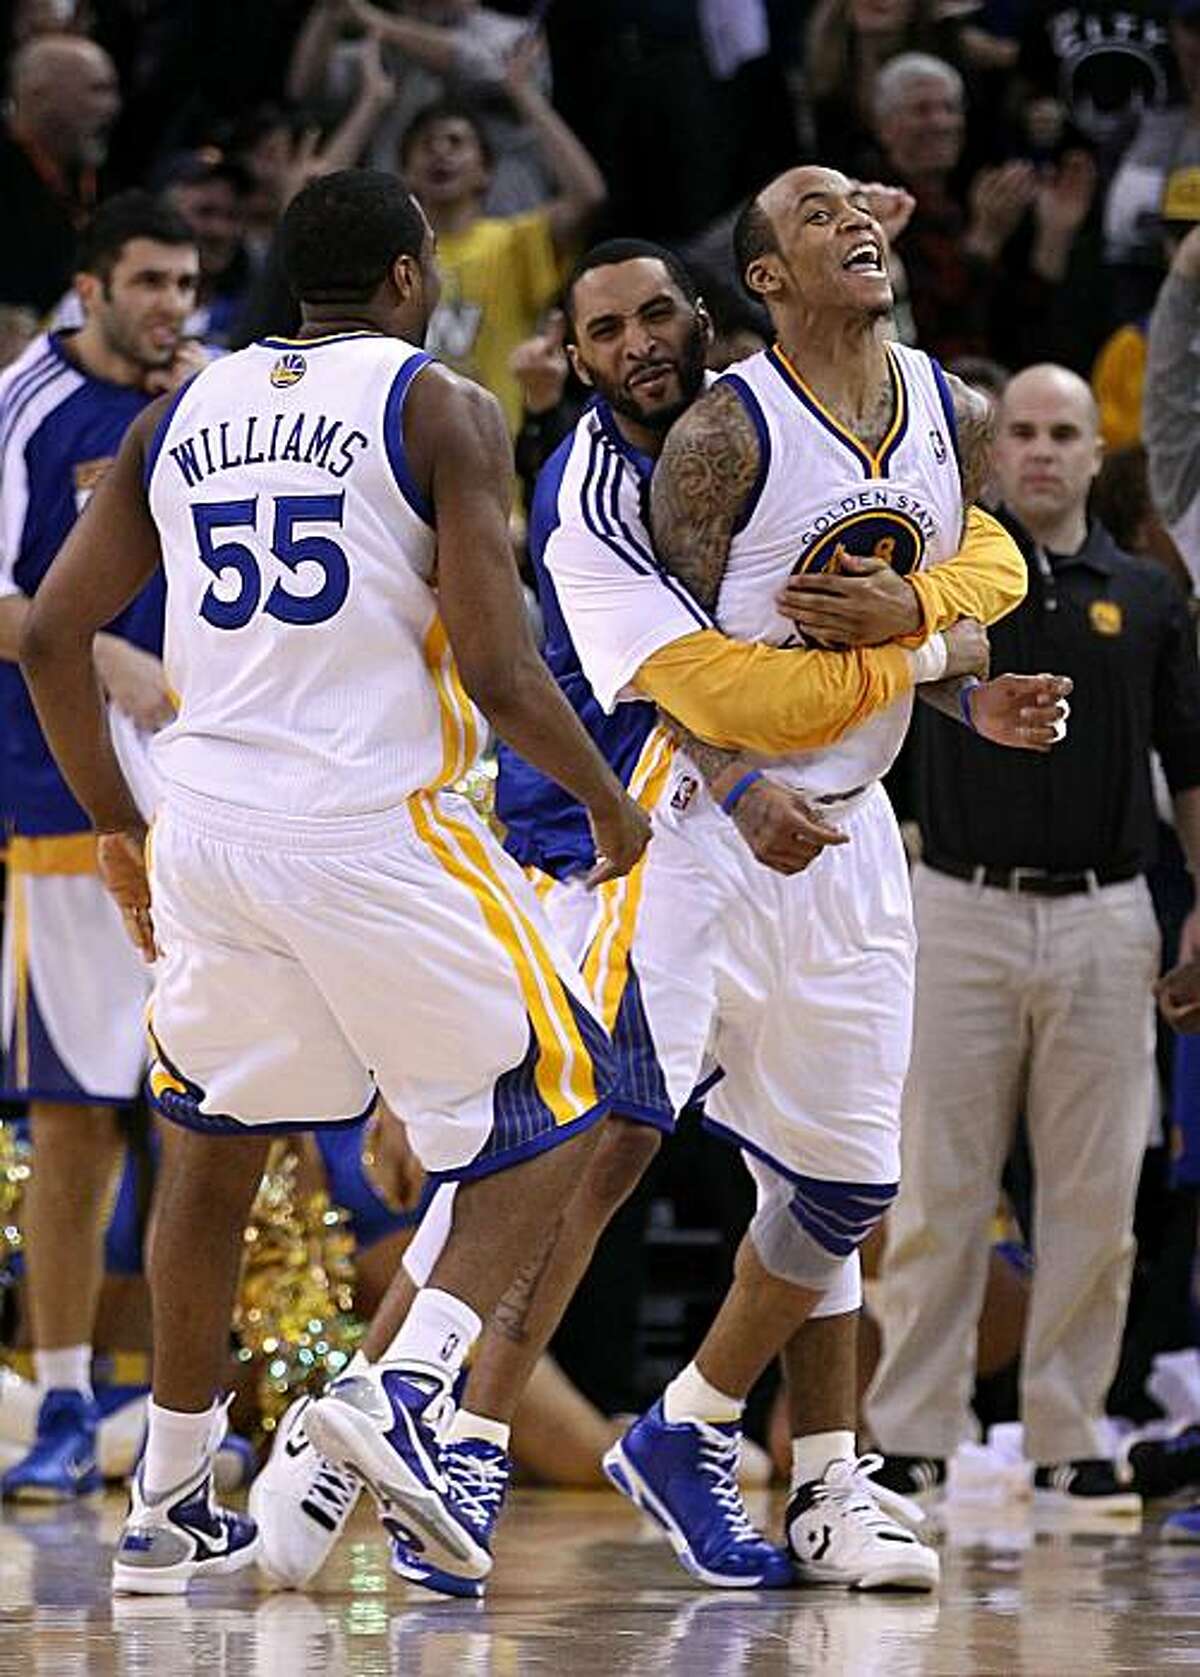 OAKLAND, CA - JANUARY 19: Monta Ellis #8 of the Golden State Warriors is congratulated by teammates after he made the winning shot with 0.6 seconds left in their game againsts the Indiana Pacers at Oracle Arena on January 19, 2011 in Oakland, California.NOTE TO USER: User expressly acknowledges and agrees that, by downloading and or using this photograph, User is consenting to the terms and conditions of the Getty Images License Agreement.